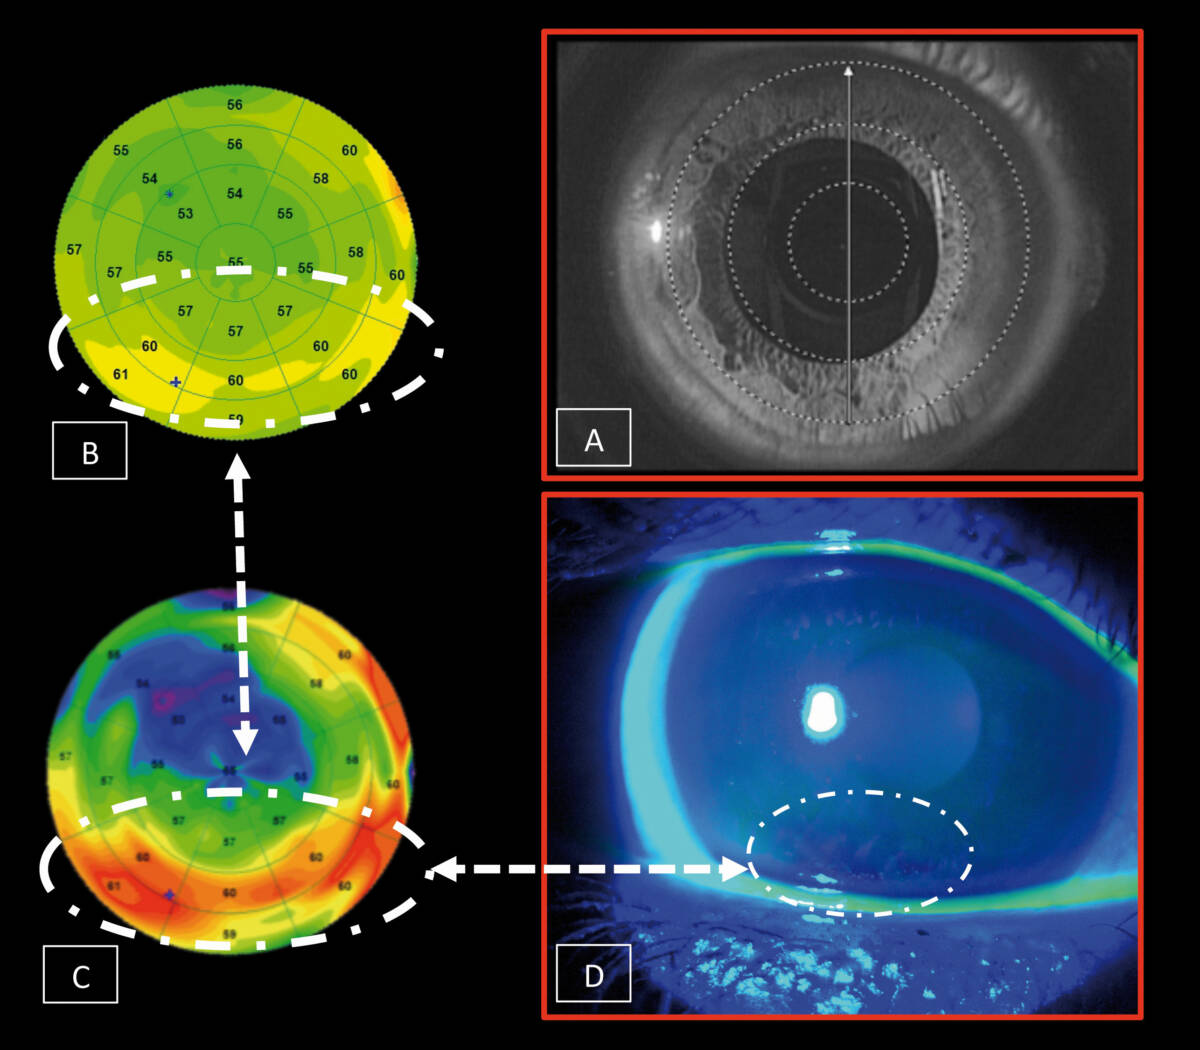 Figure 2.&nbsp; A. Image of a patient’s cornea acquired by OCT imaging using infrared camera. B. Epithelial thickness map highlighting the crescent-shaped region of hyperplasia below the apex. C. Epithelial thickness map using a standardized scale showing the presence of hyperplasia more clearly. D. BUT examination showing the presence of rupture of the tear film caused by a few superficial punctate keratitis lesions at the site corresponding to that of corneal epithelial hyperplasia.
